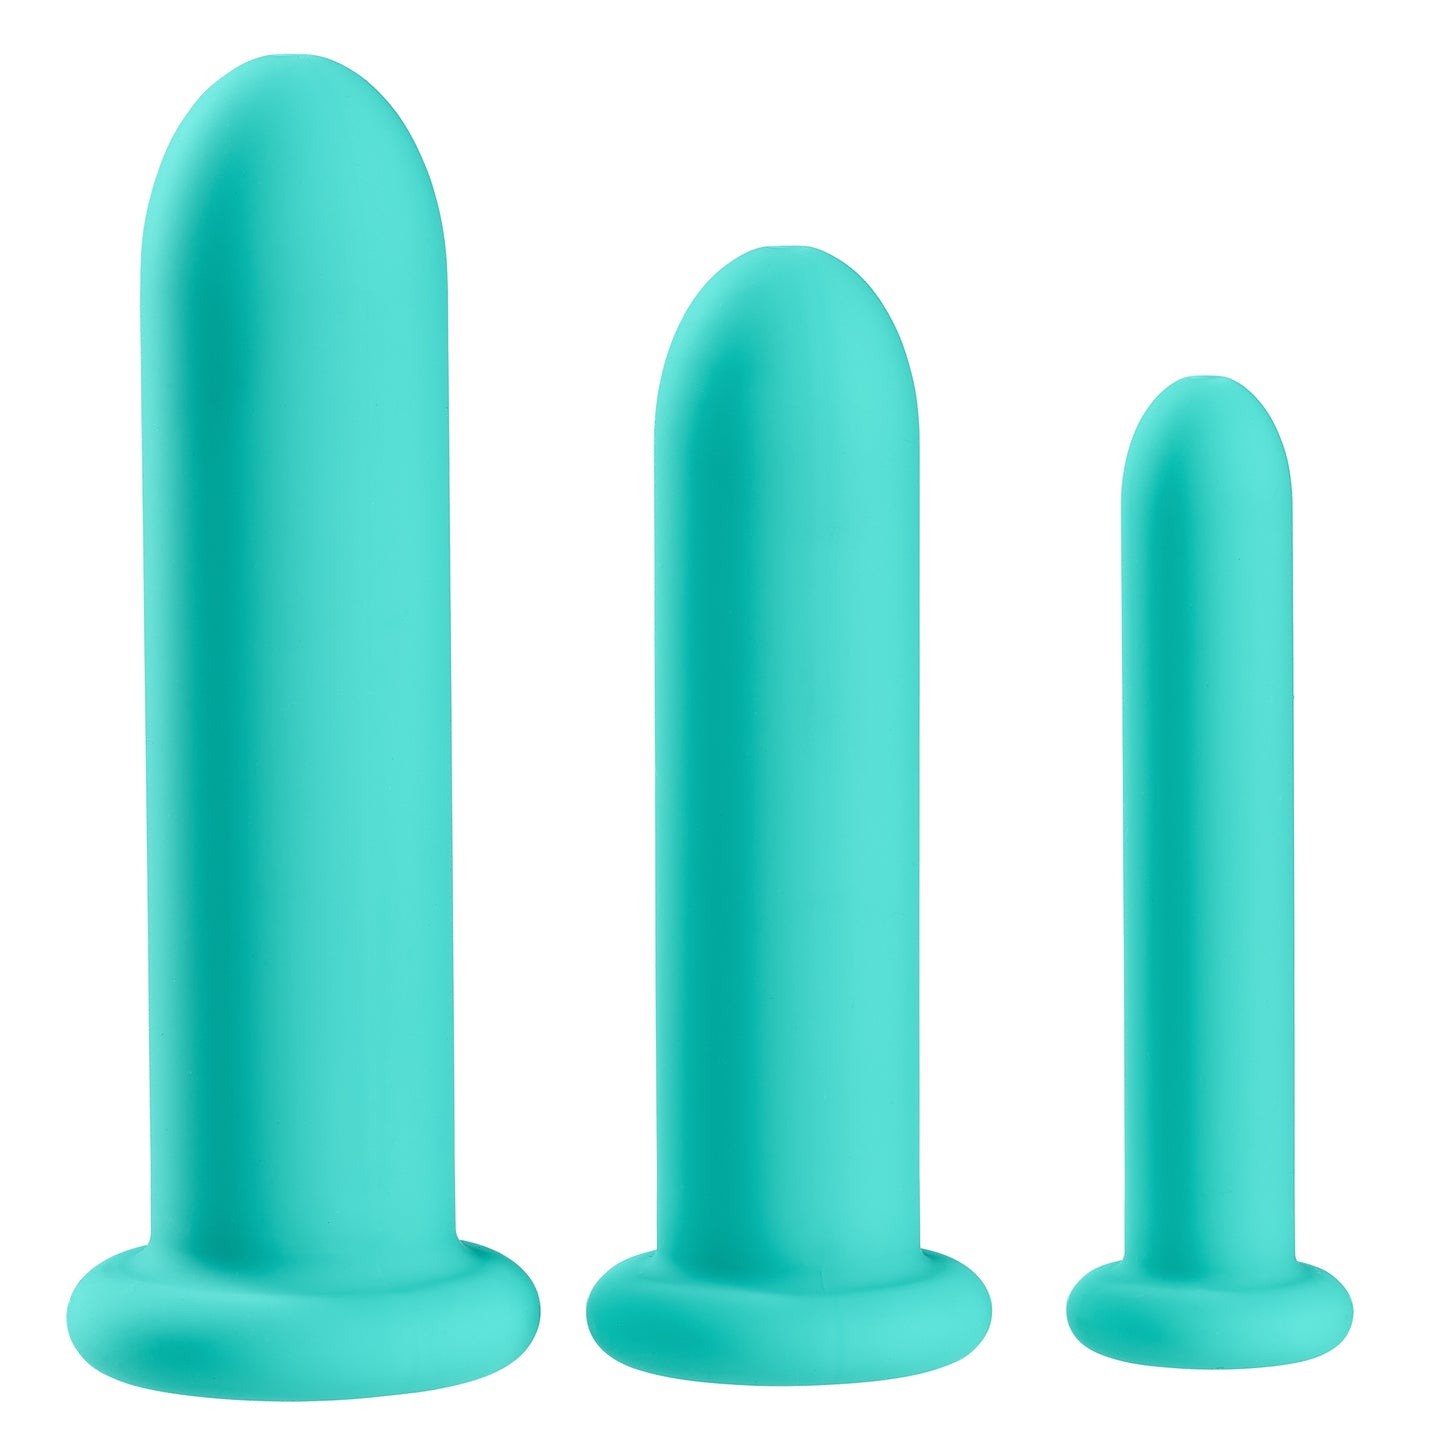 Product image out of box. Three silicone phallic shaped dilators. Teal colored. Small medium and large, appear like tampon applicators.